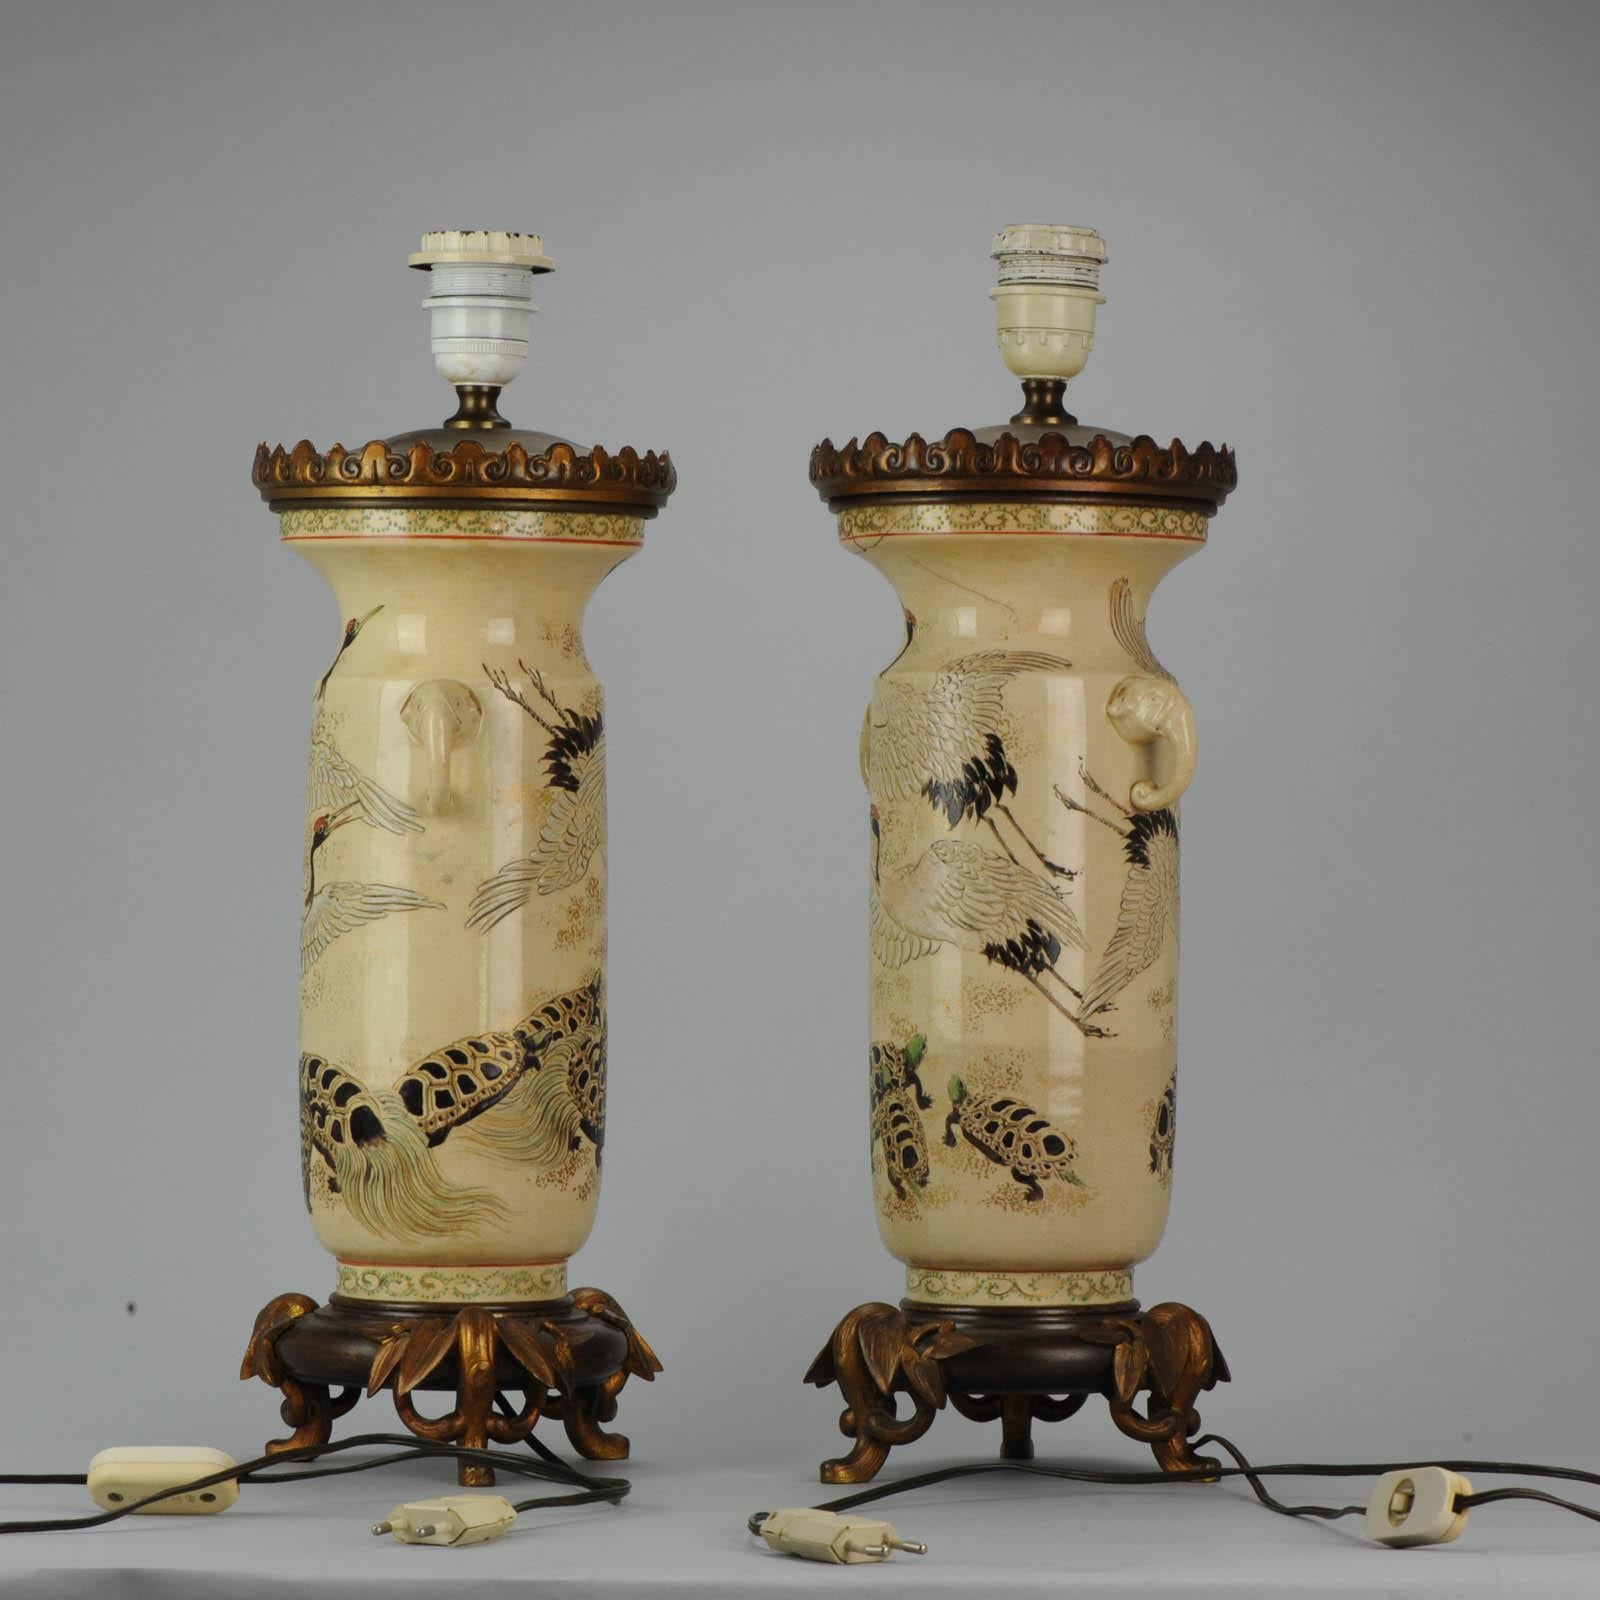 Lovely Antique Satsuma Lamp Vase Set with Cranes and Turtles, Japan 19th Century In Distressed Condition For Sale In Amsterdam, Noord Holland